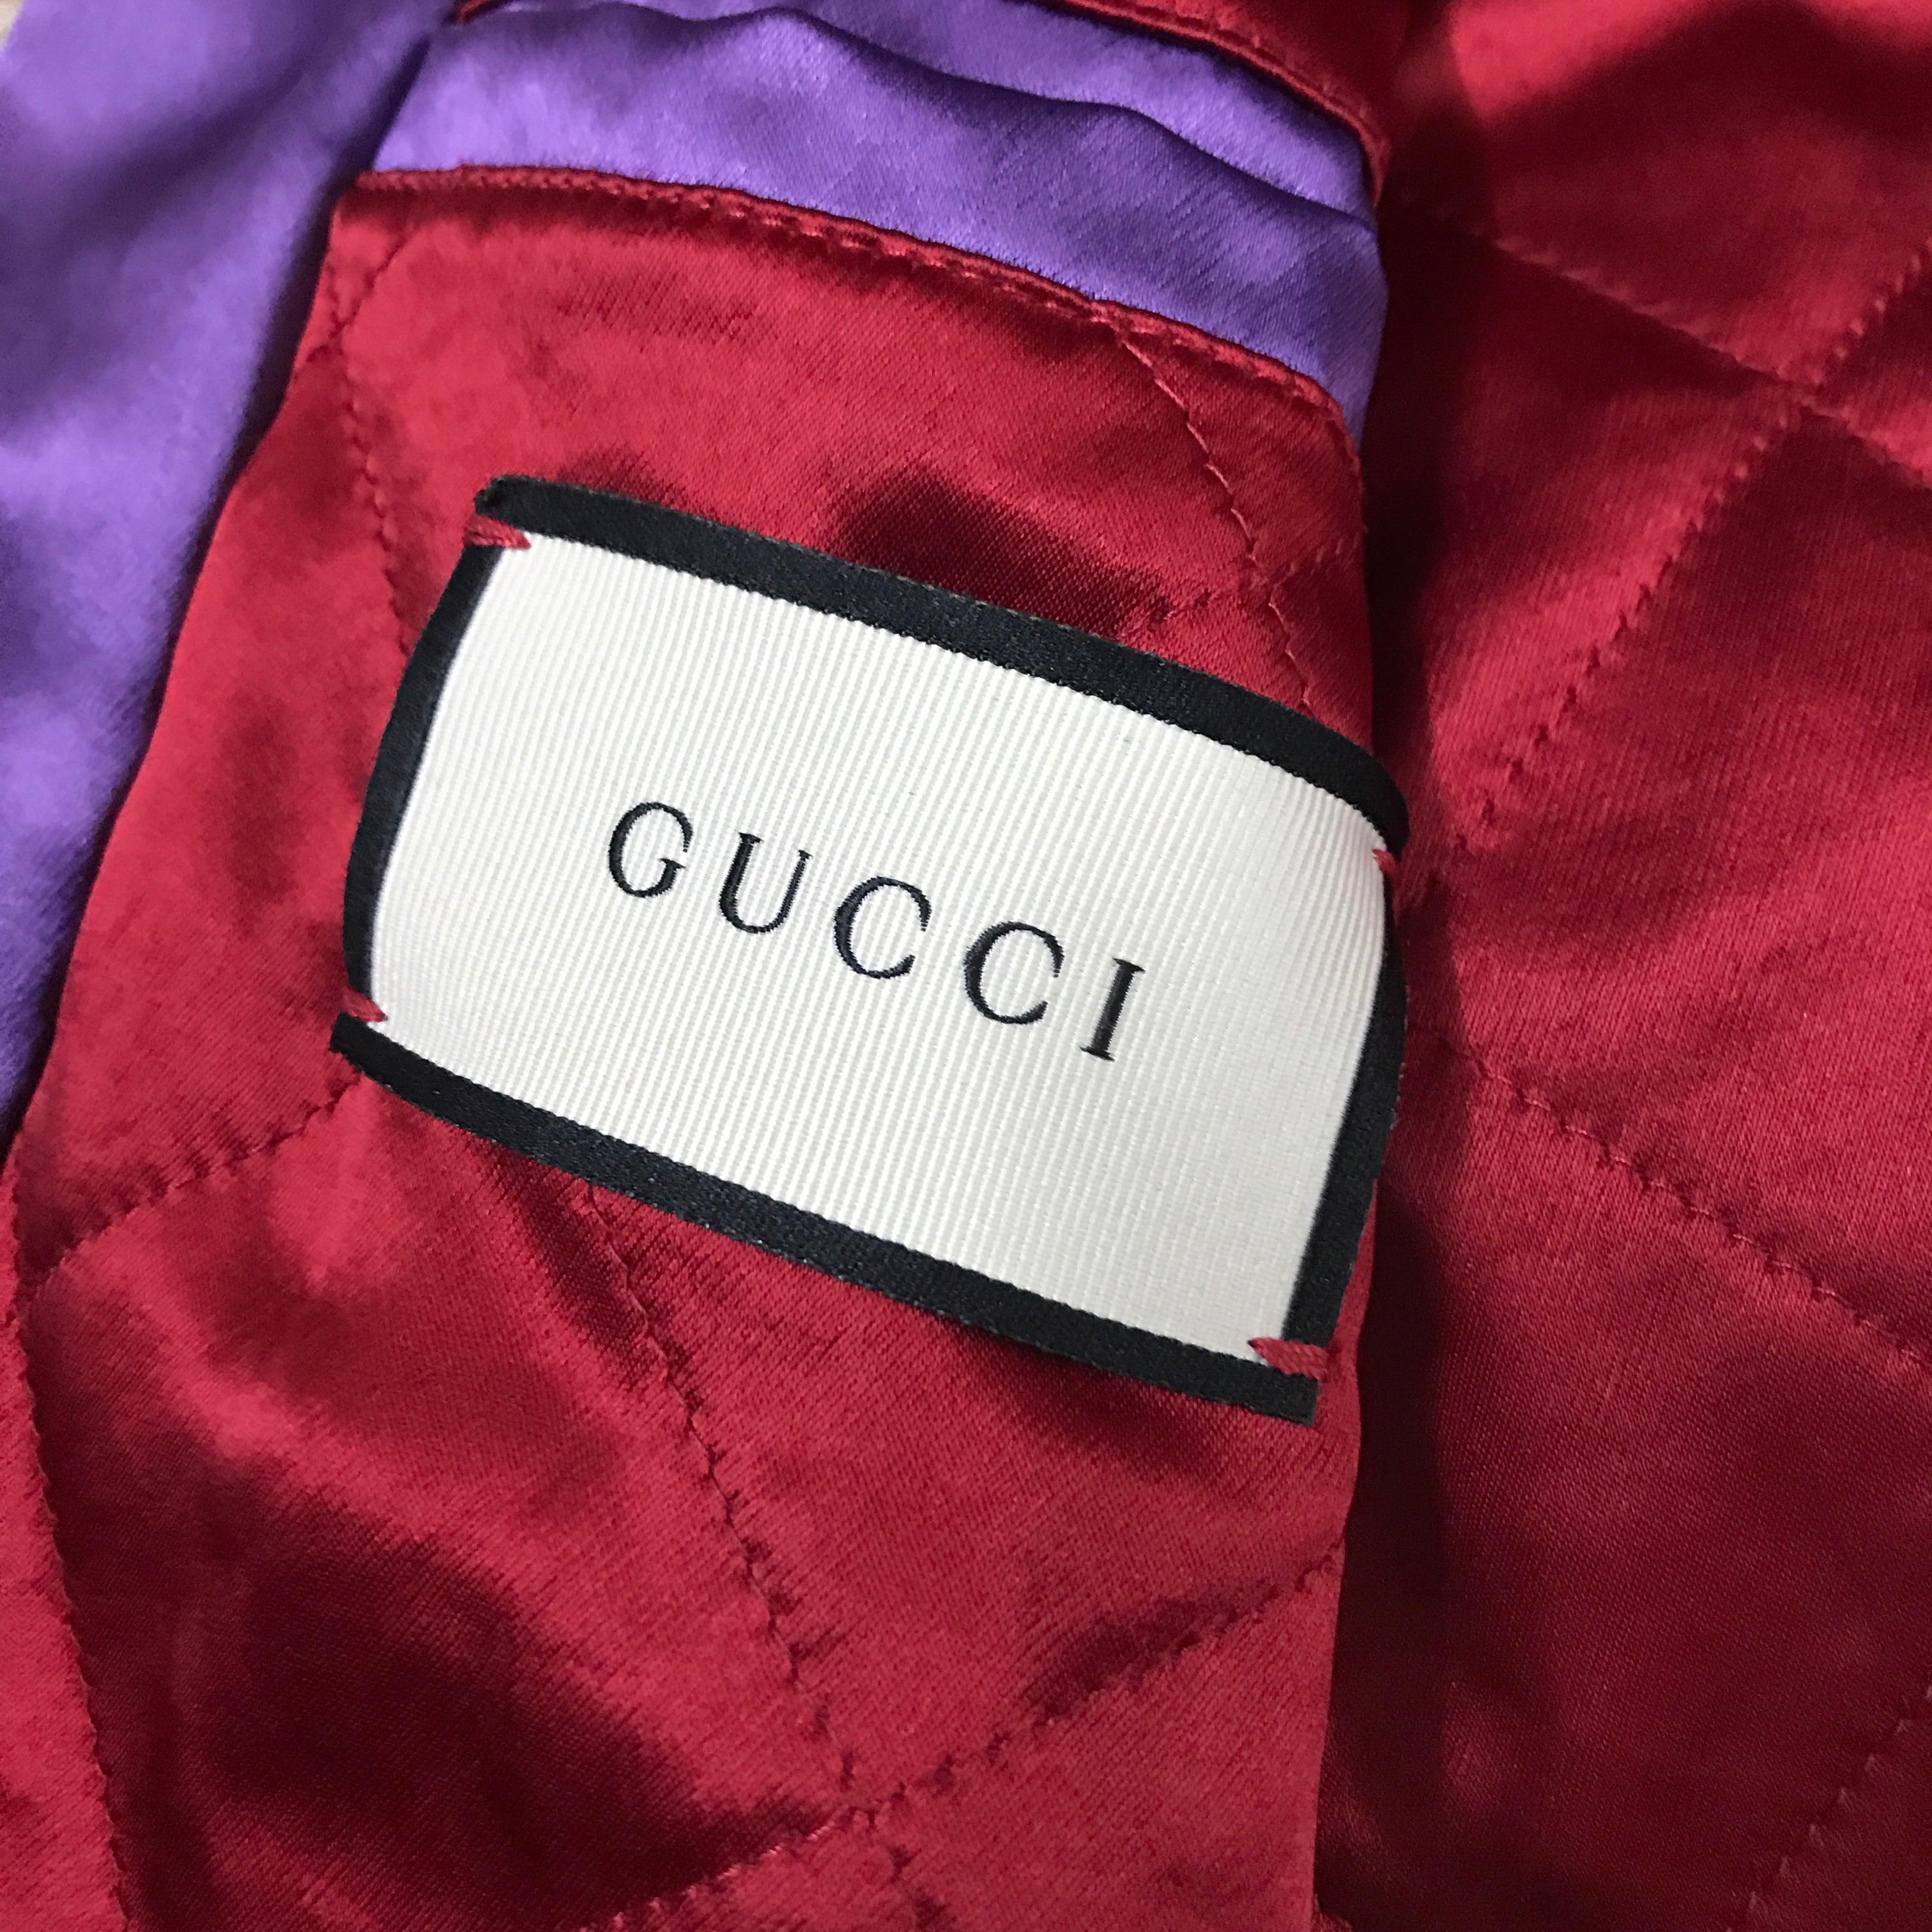 From Gucci RTW Spring Summer 2017 collection.

The rarest item with the 